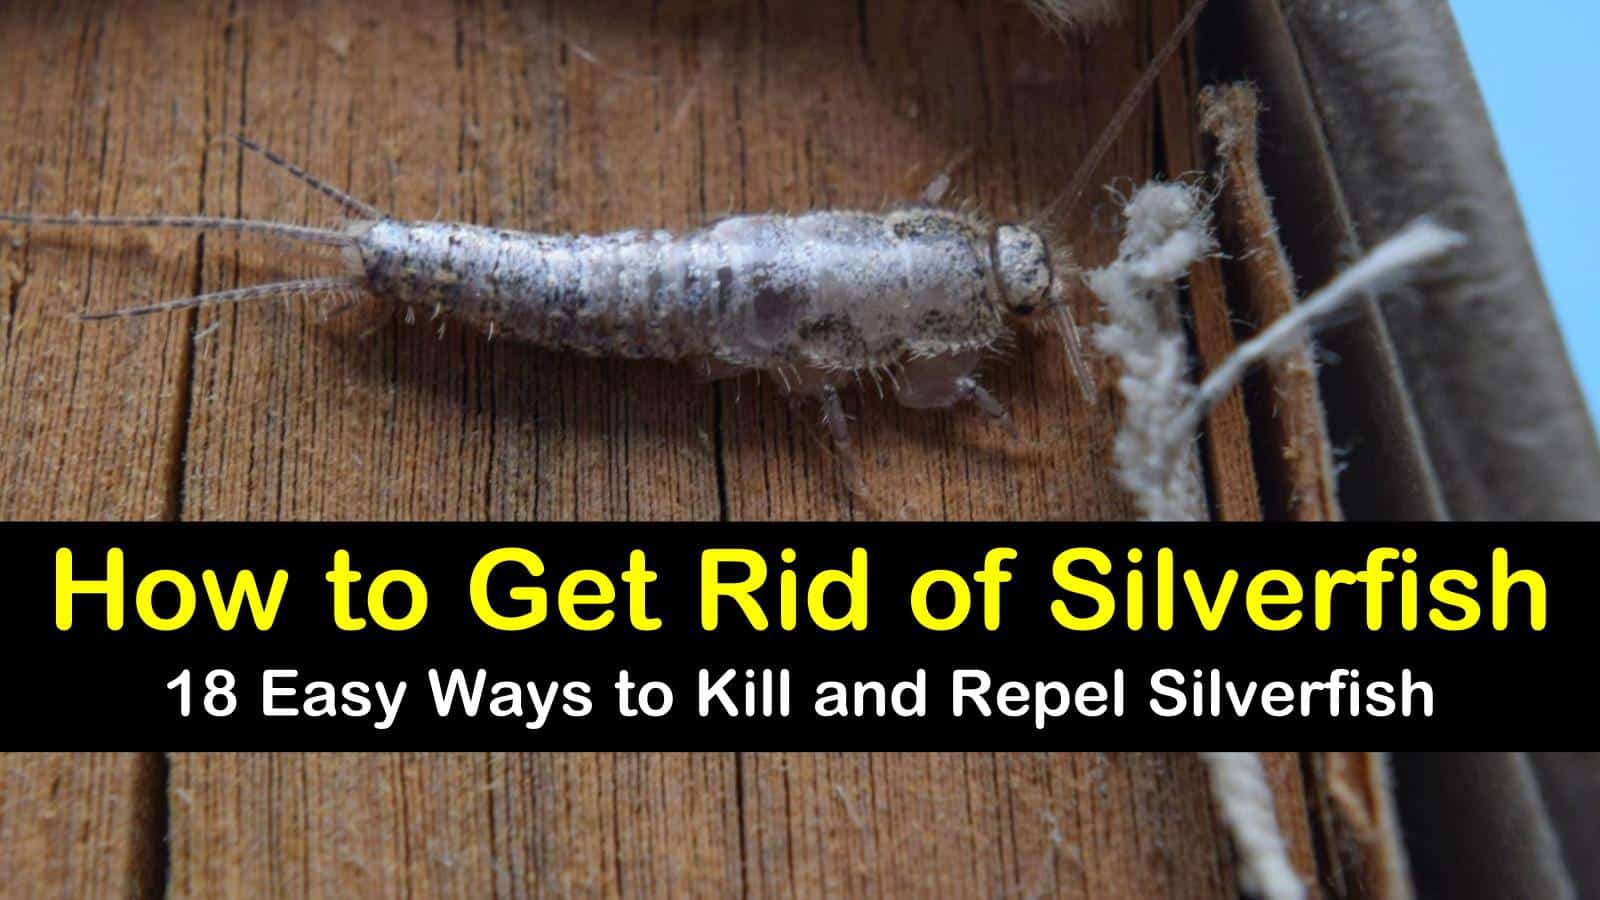 18 Easy Ways to Kill and Repel Silverfish titleimg1